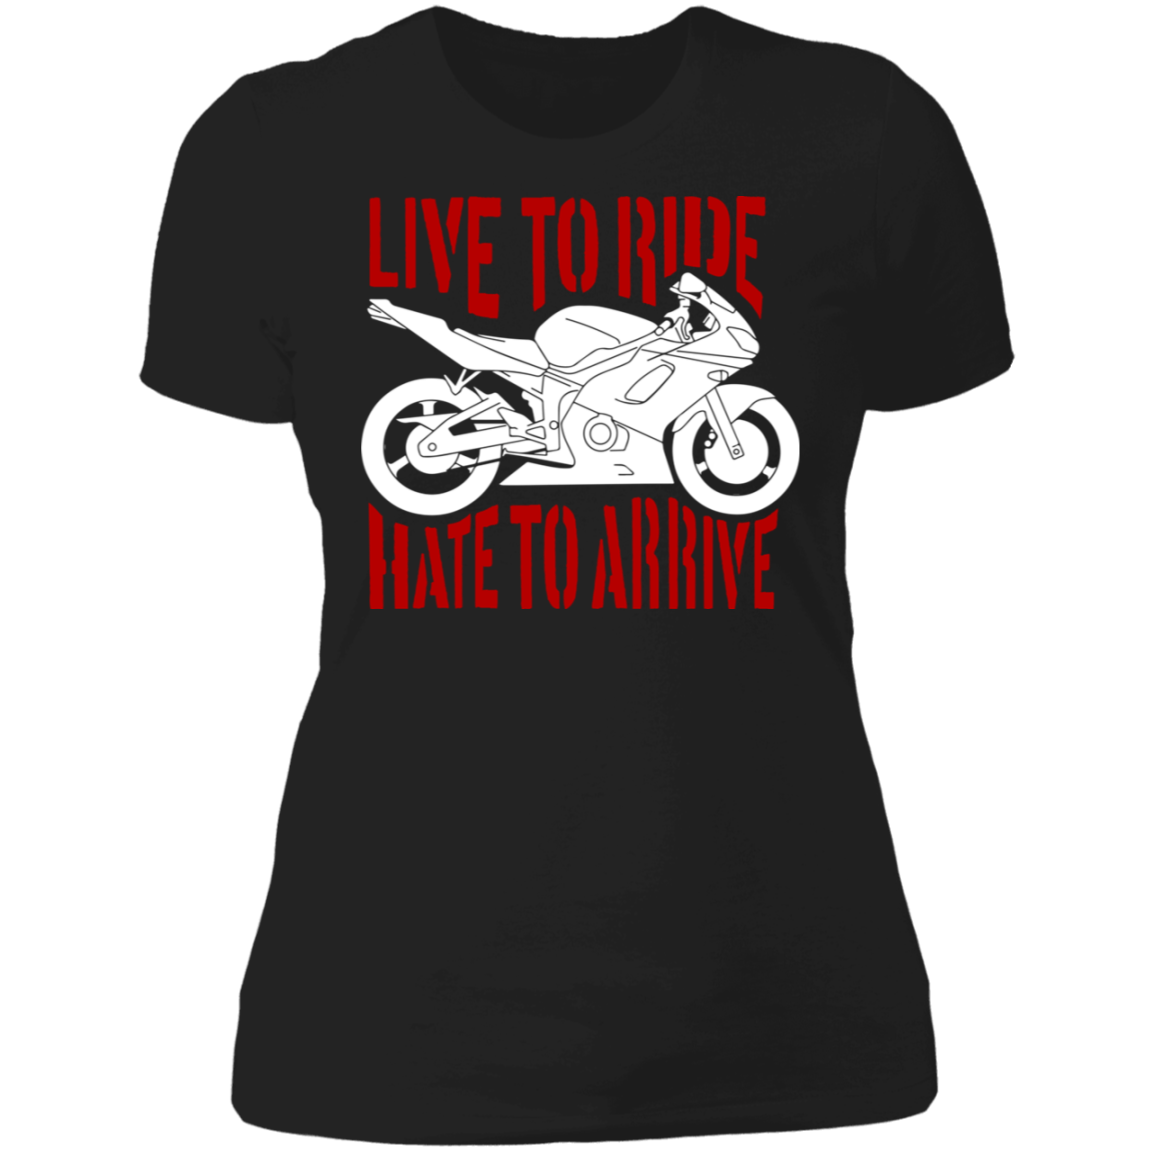 RIDE and LIVE TODAY LADIES T-SHIRT